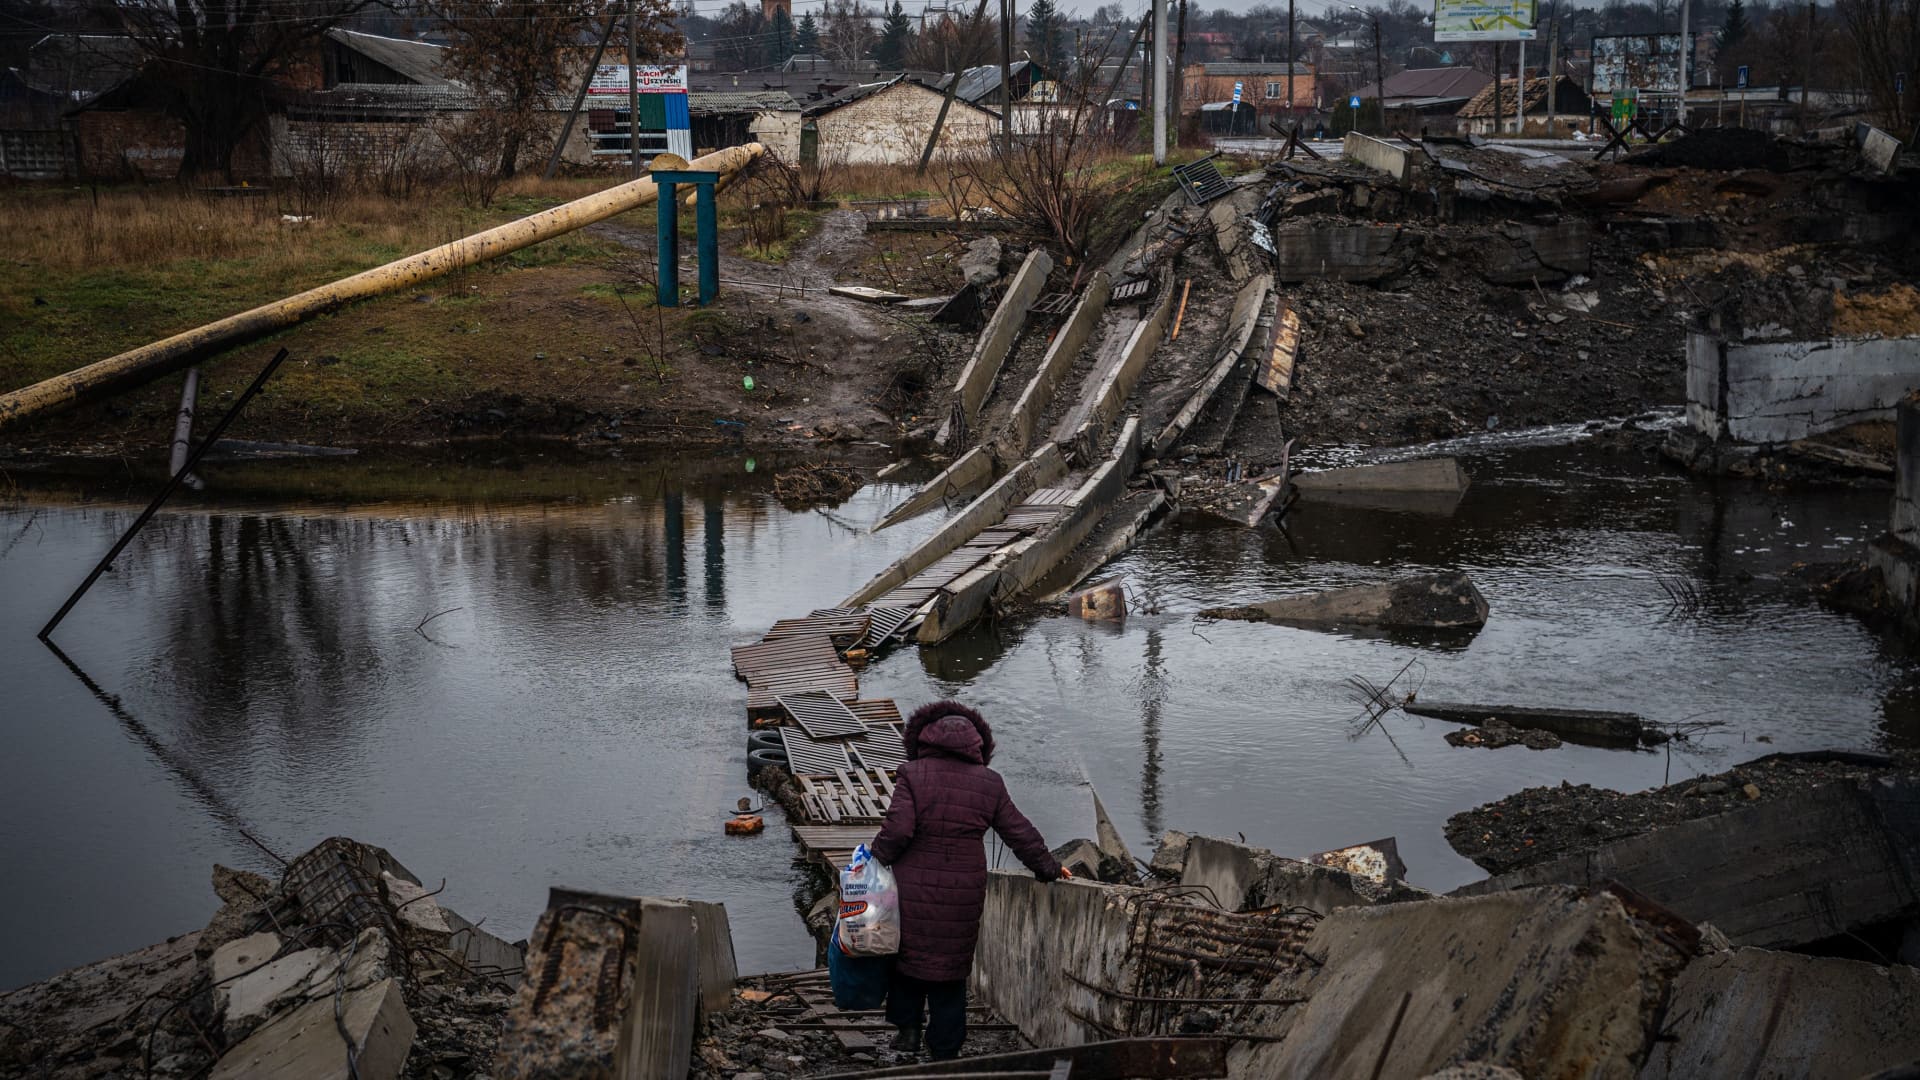 A woman crosses a destroyed bridge in Bakhmut, Donetsk region, on Jan. 6, 2023, amid the Russian invasion of Ukraine. Russia and Ukraine have both suffered heavy losses in the fight for Bakhmut, and most of the city's pre-war population of 70,000 have left for safer territory, leaving behind cratered roads and buildings reduced to rubble and twisted metal.